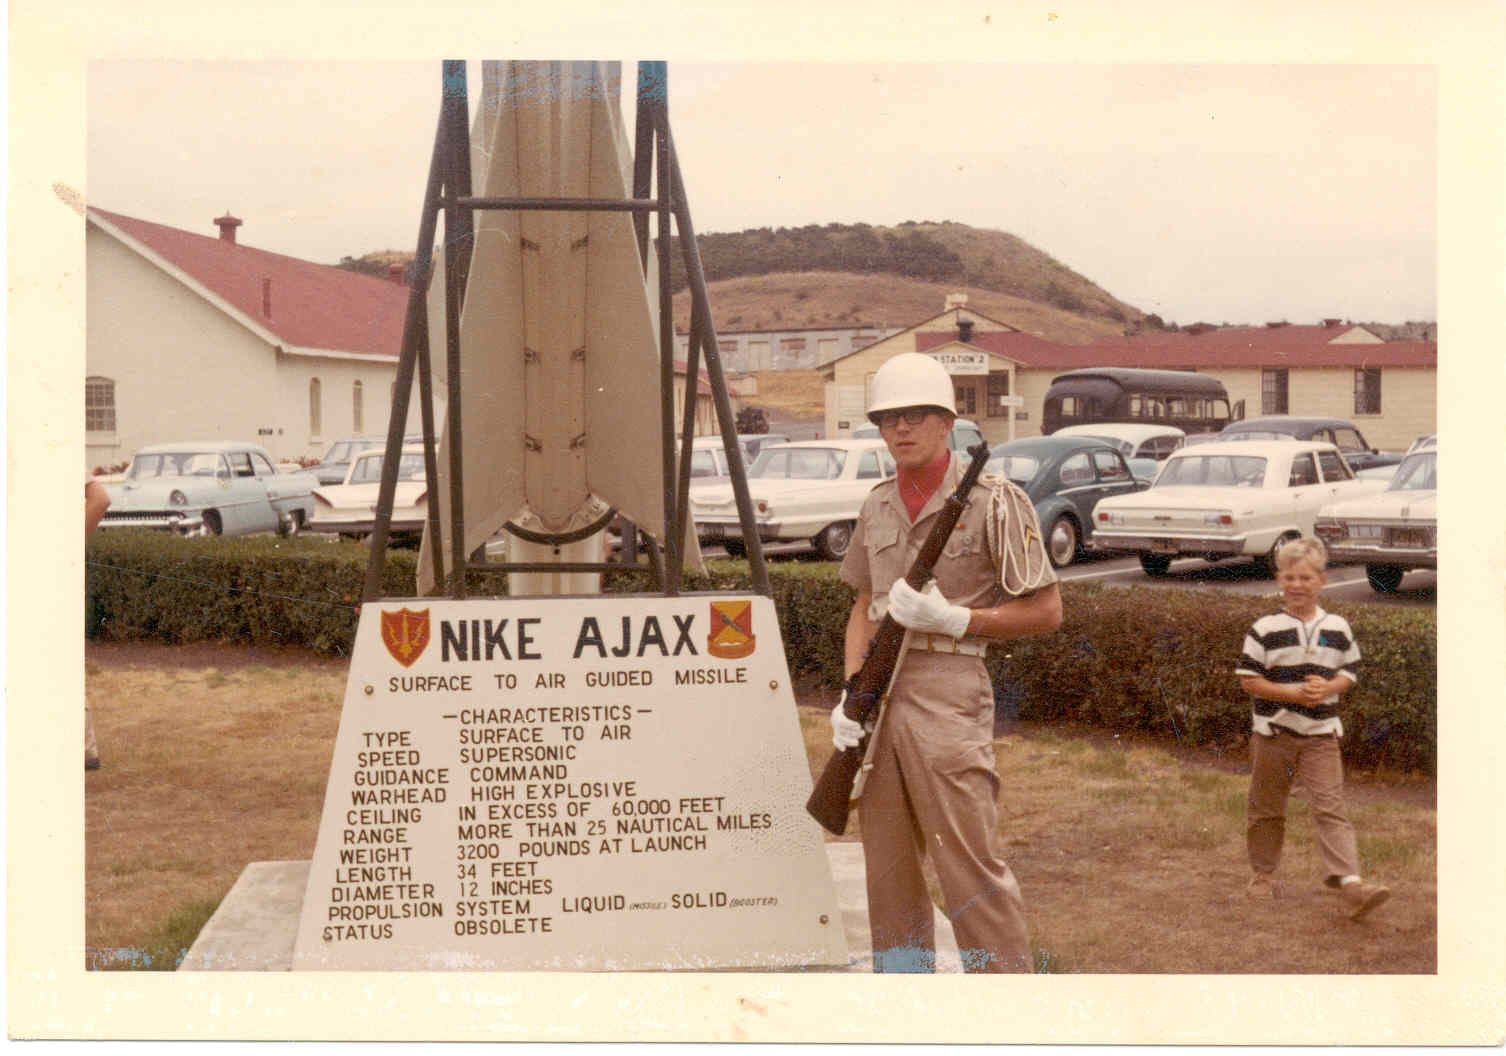 In Aug,'66 Terry Fetterman, dressed in color guard uniform, stands beside a monument to the obsolete Nike Ajax missile at Fort Baker, California.